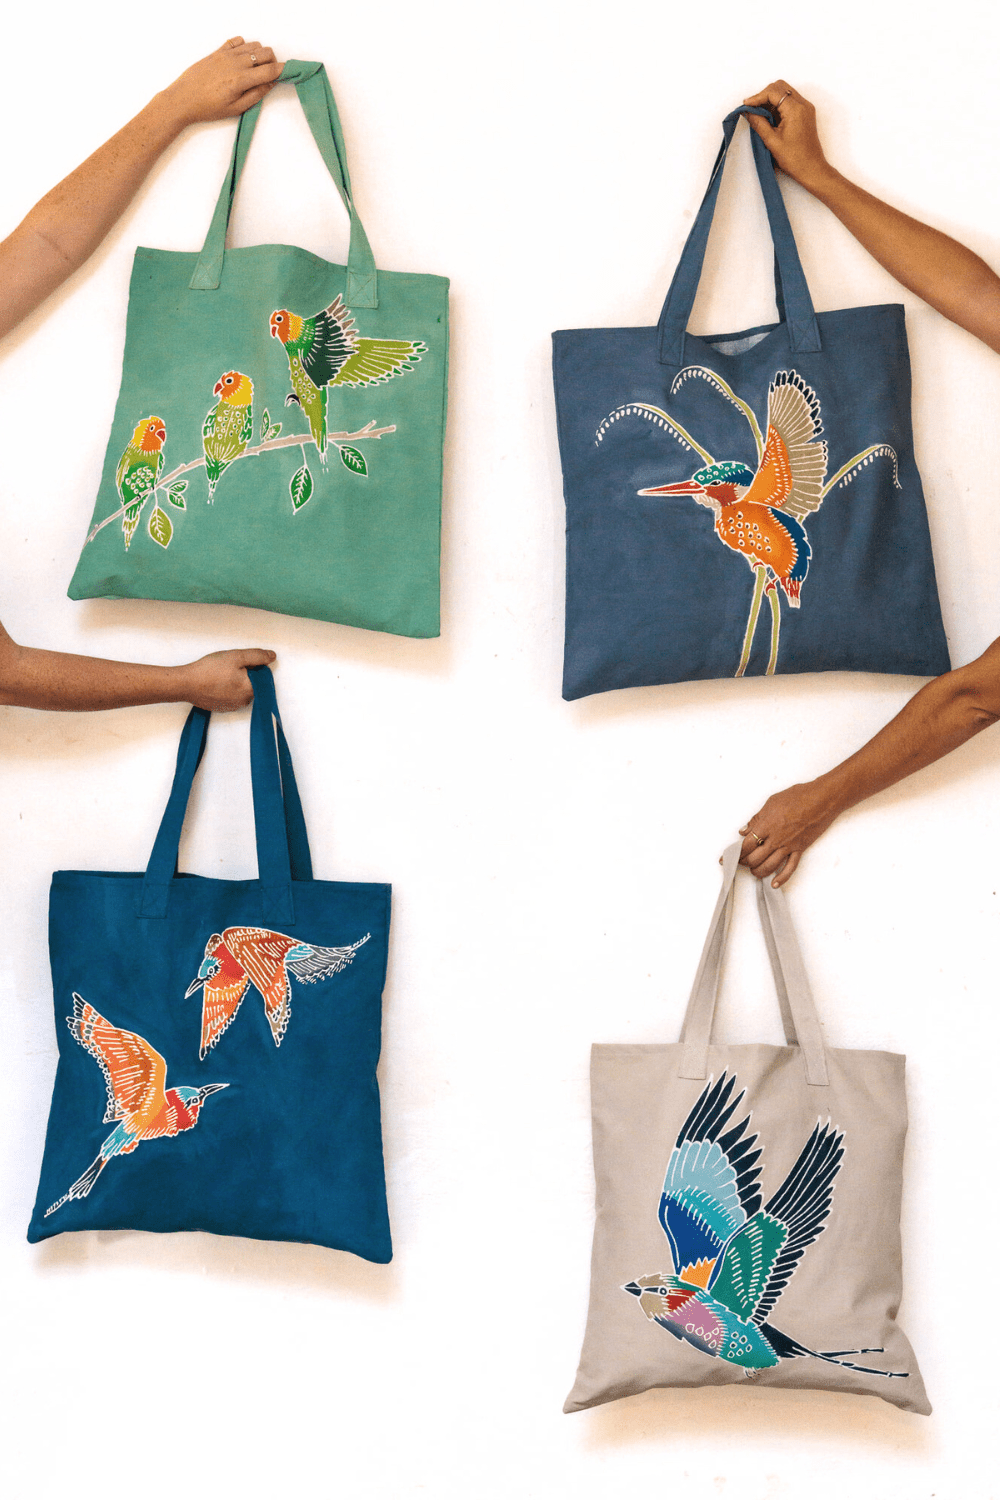 Papiko Lilac Breasted Roller Tote Bag - Handmade by TRIBAL TEXTILES - Handcrafted Home Decor Interiors - African Made